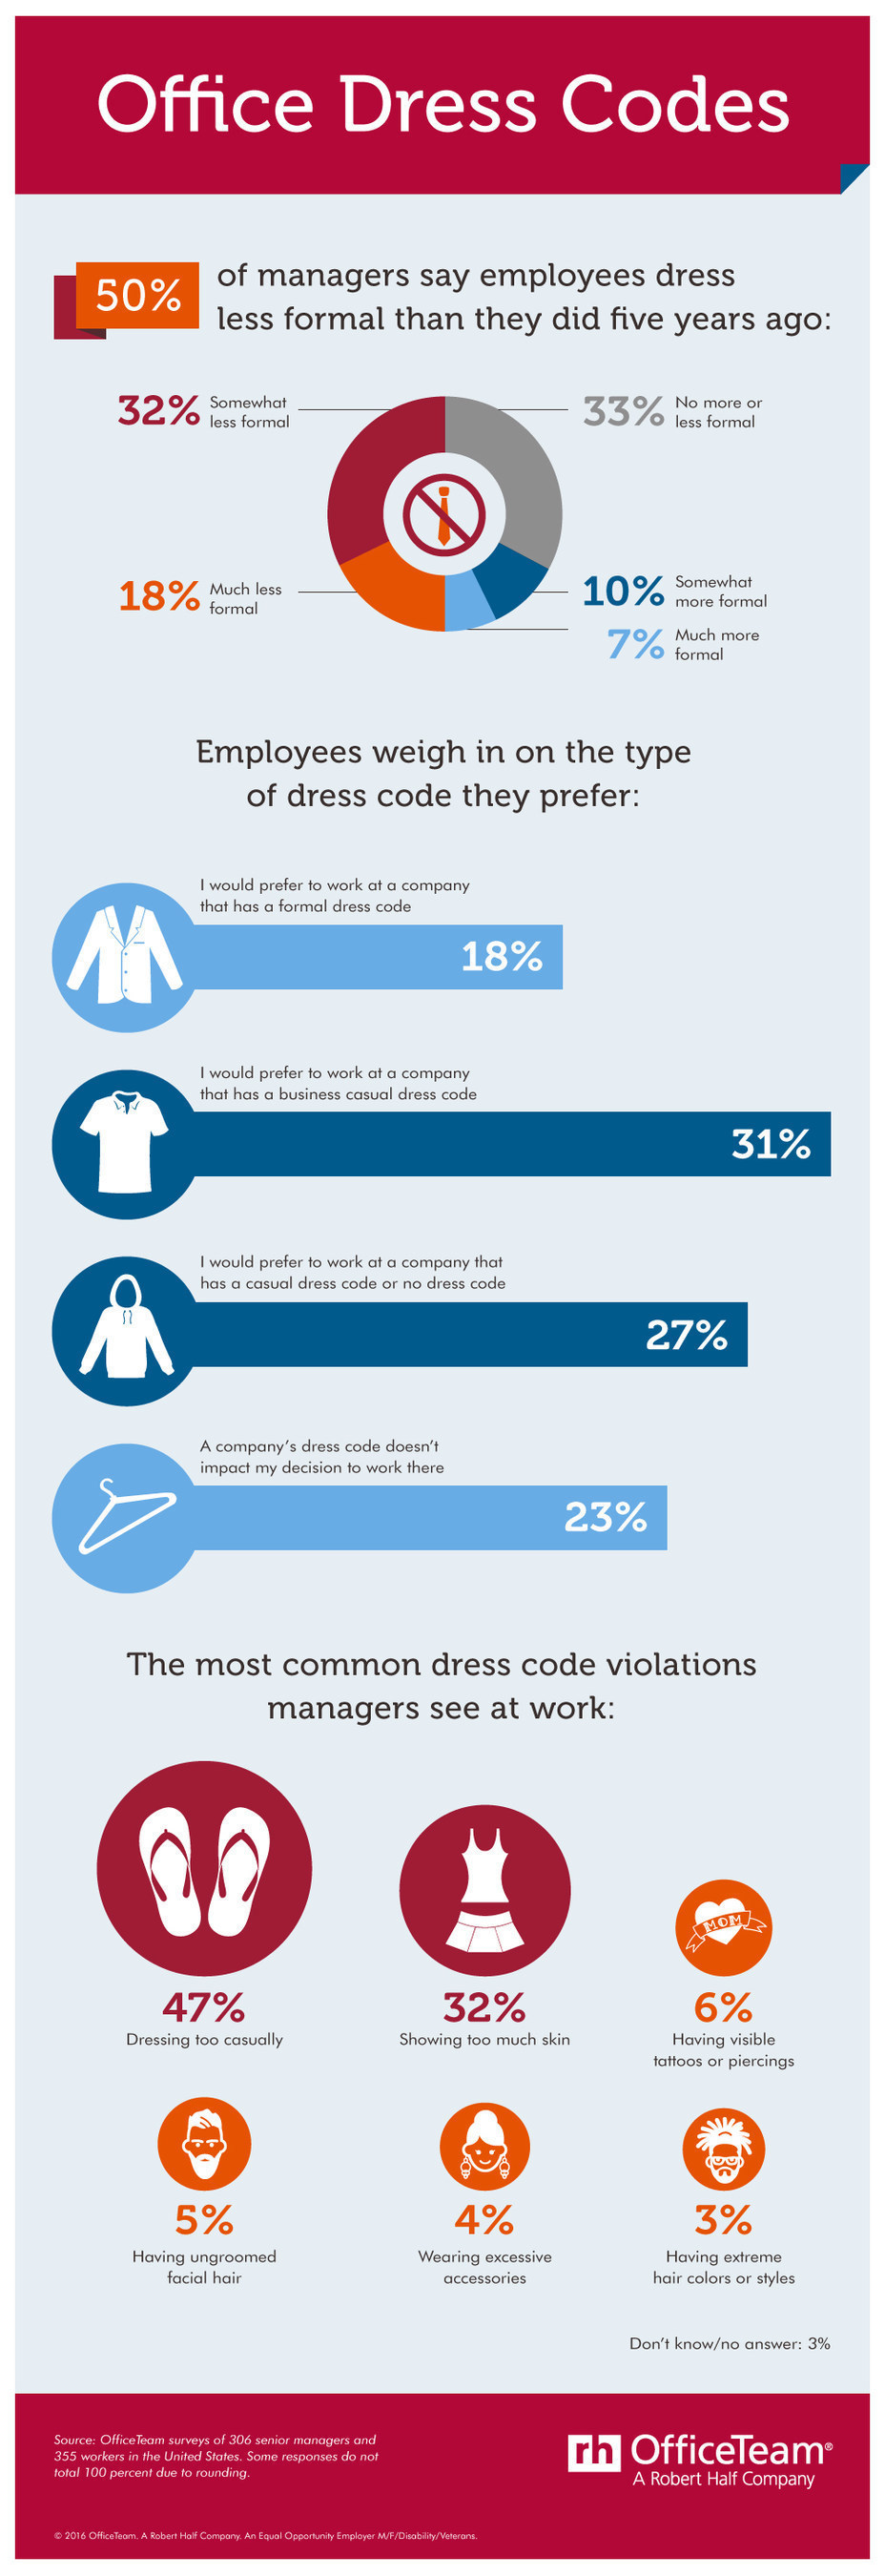 1/2 of senior managers said employees wear less formal clothing than they did five years ago. In addition, nearly 1/3 (31%) of office workers would prefer to be at a company with a business casual dress code; 27% favor a casual dress code or no dress code at all. Senior managers also identified dressing too casually (47%) as the most common dress code violation, followed by showing too much skin (32%).